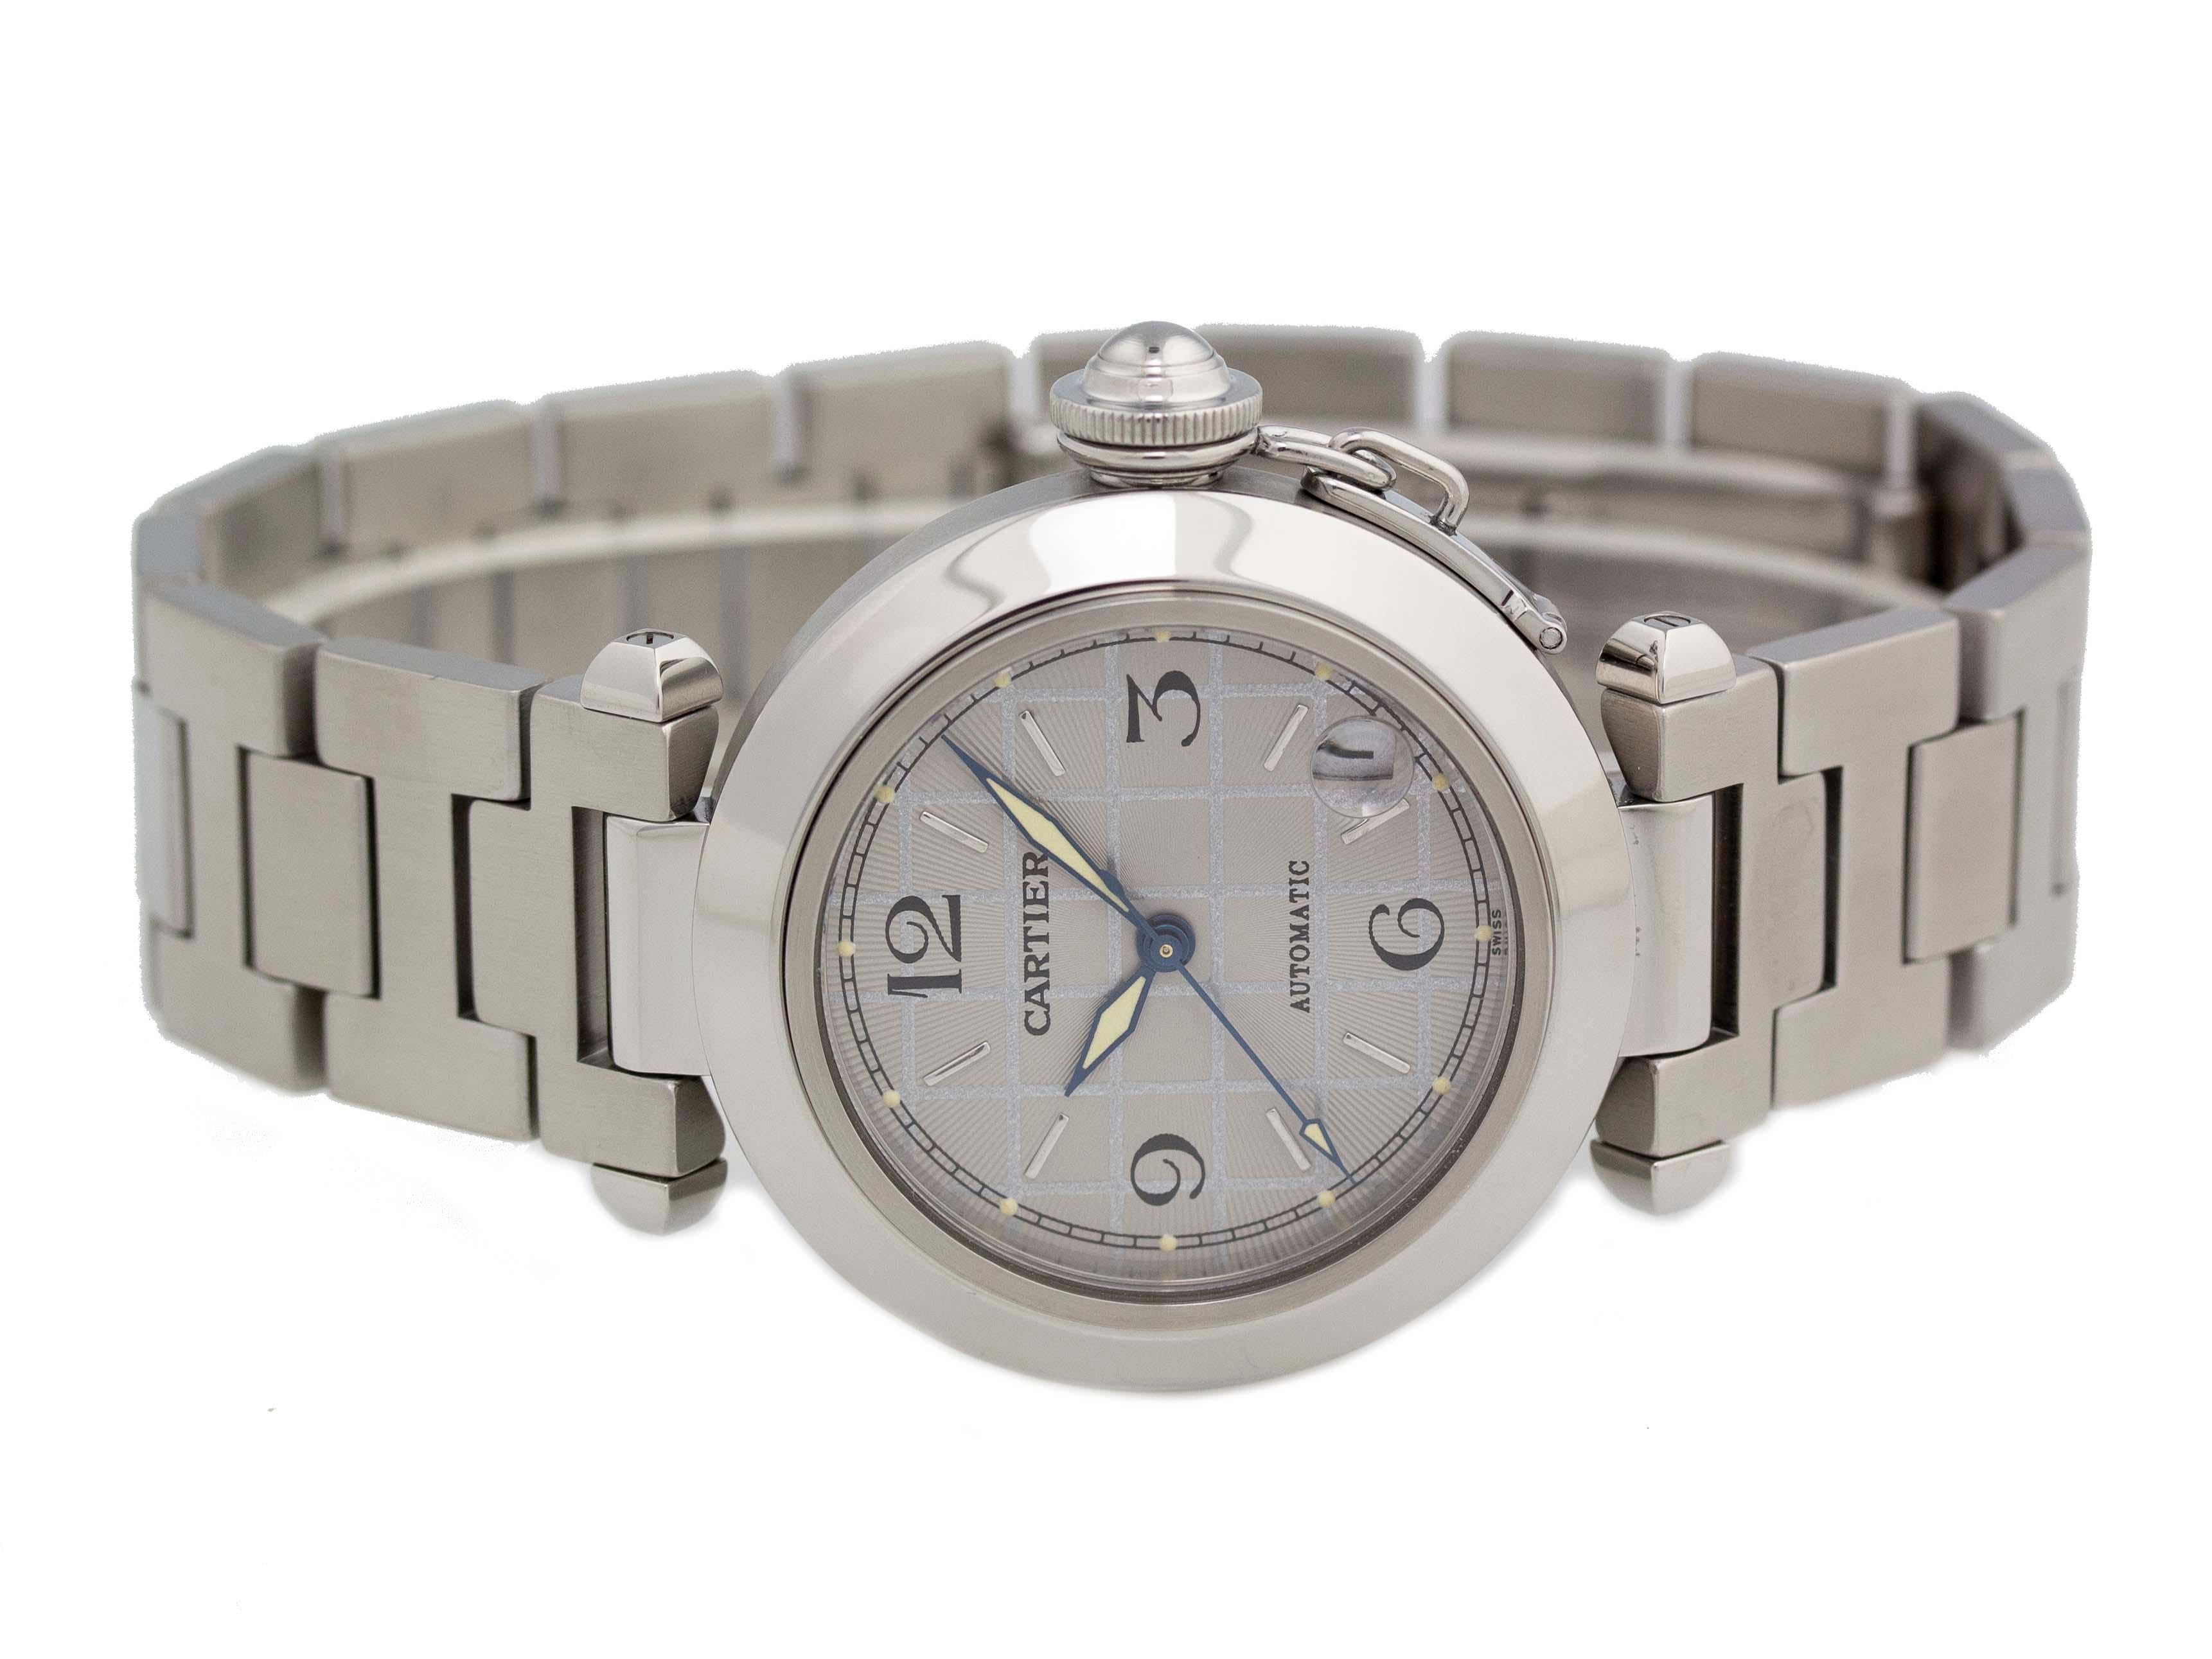 Brand	Cartier
Series	Pasha
Model	W31023M7
Gender	Unisex
Condition	Good Pre-owned, Tiny Dings & Scratches on Bezel, Case, & Bracelet
Material	Stainless Steel
Finish	Brushed & Polished
Caseback	Stainless Steel
Diameter	35mm
Thickness	10mm
Bezel	Fixed